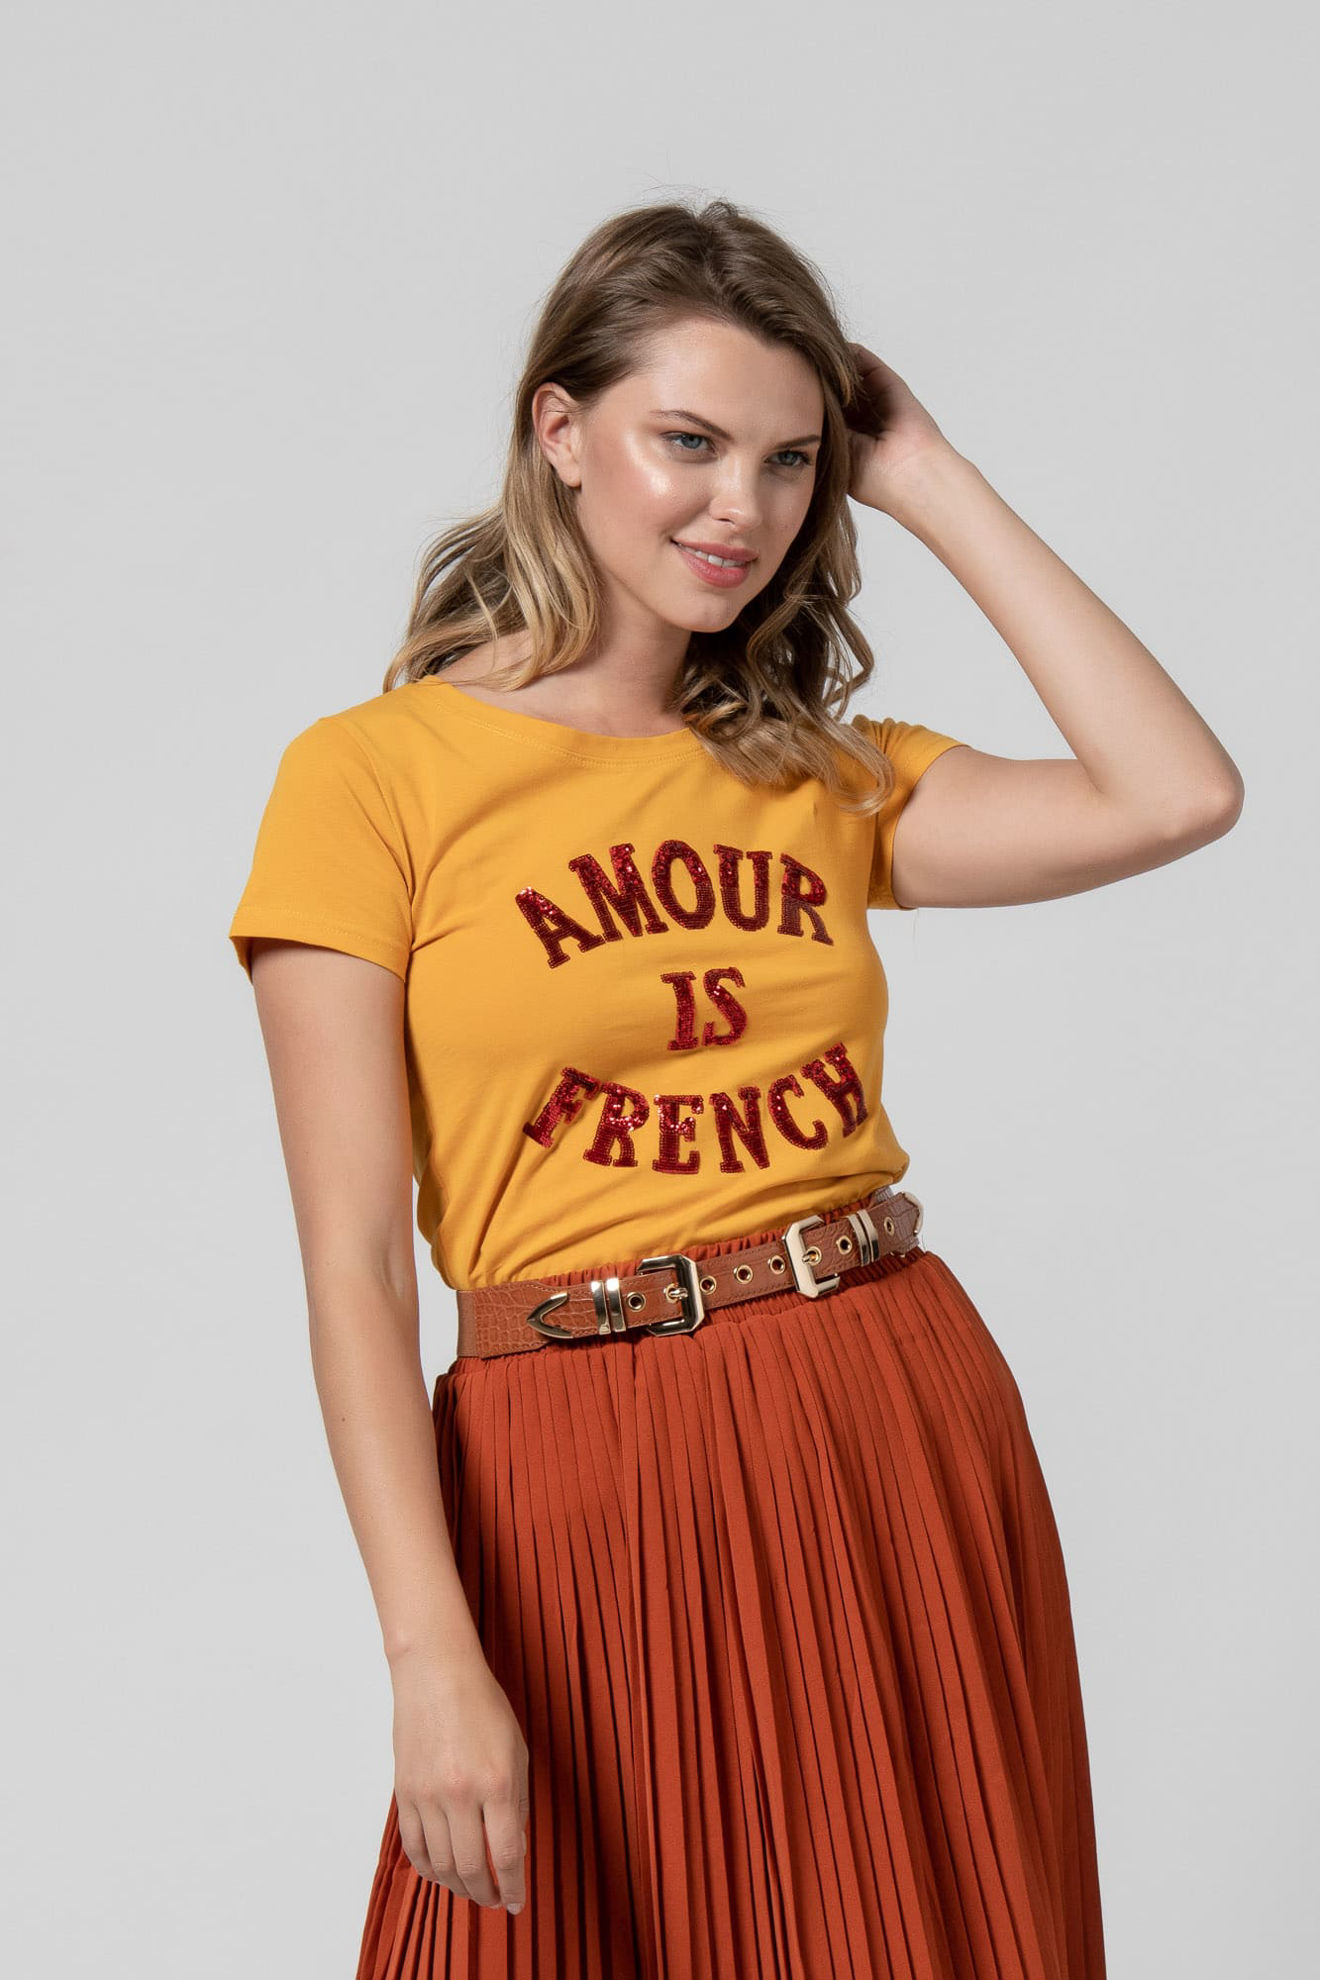 Picture of Τ-shirt french